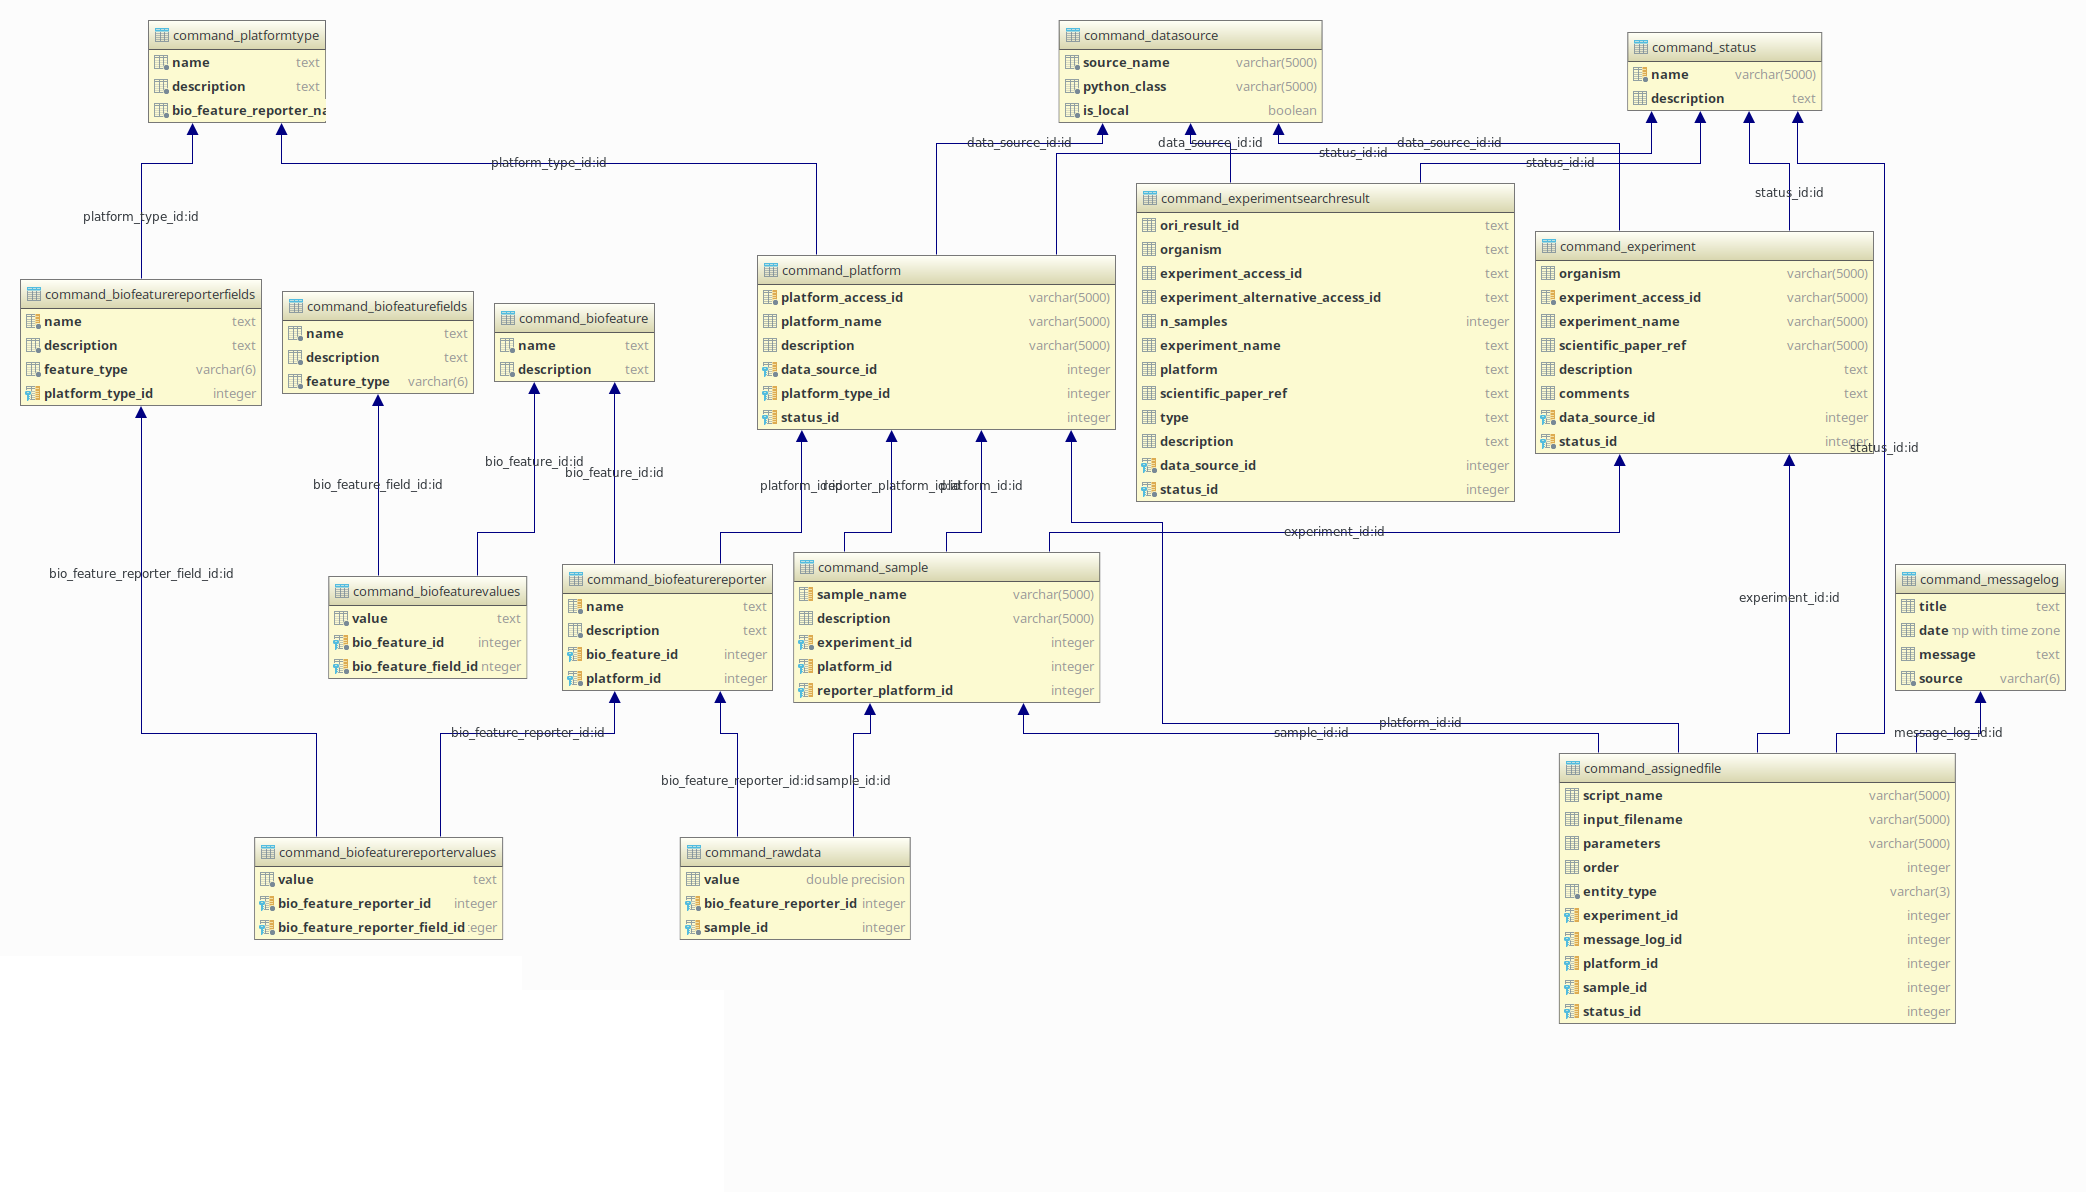 _images/Database_schema.png